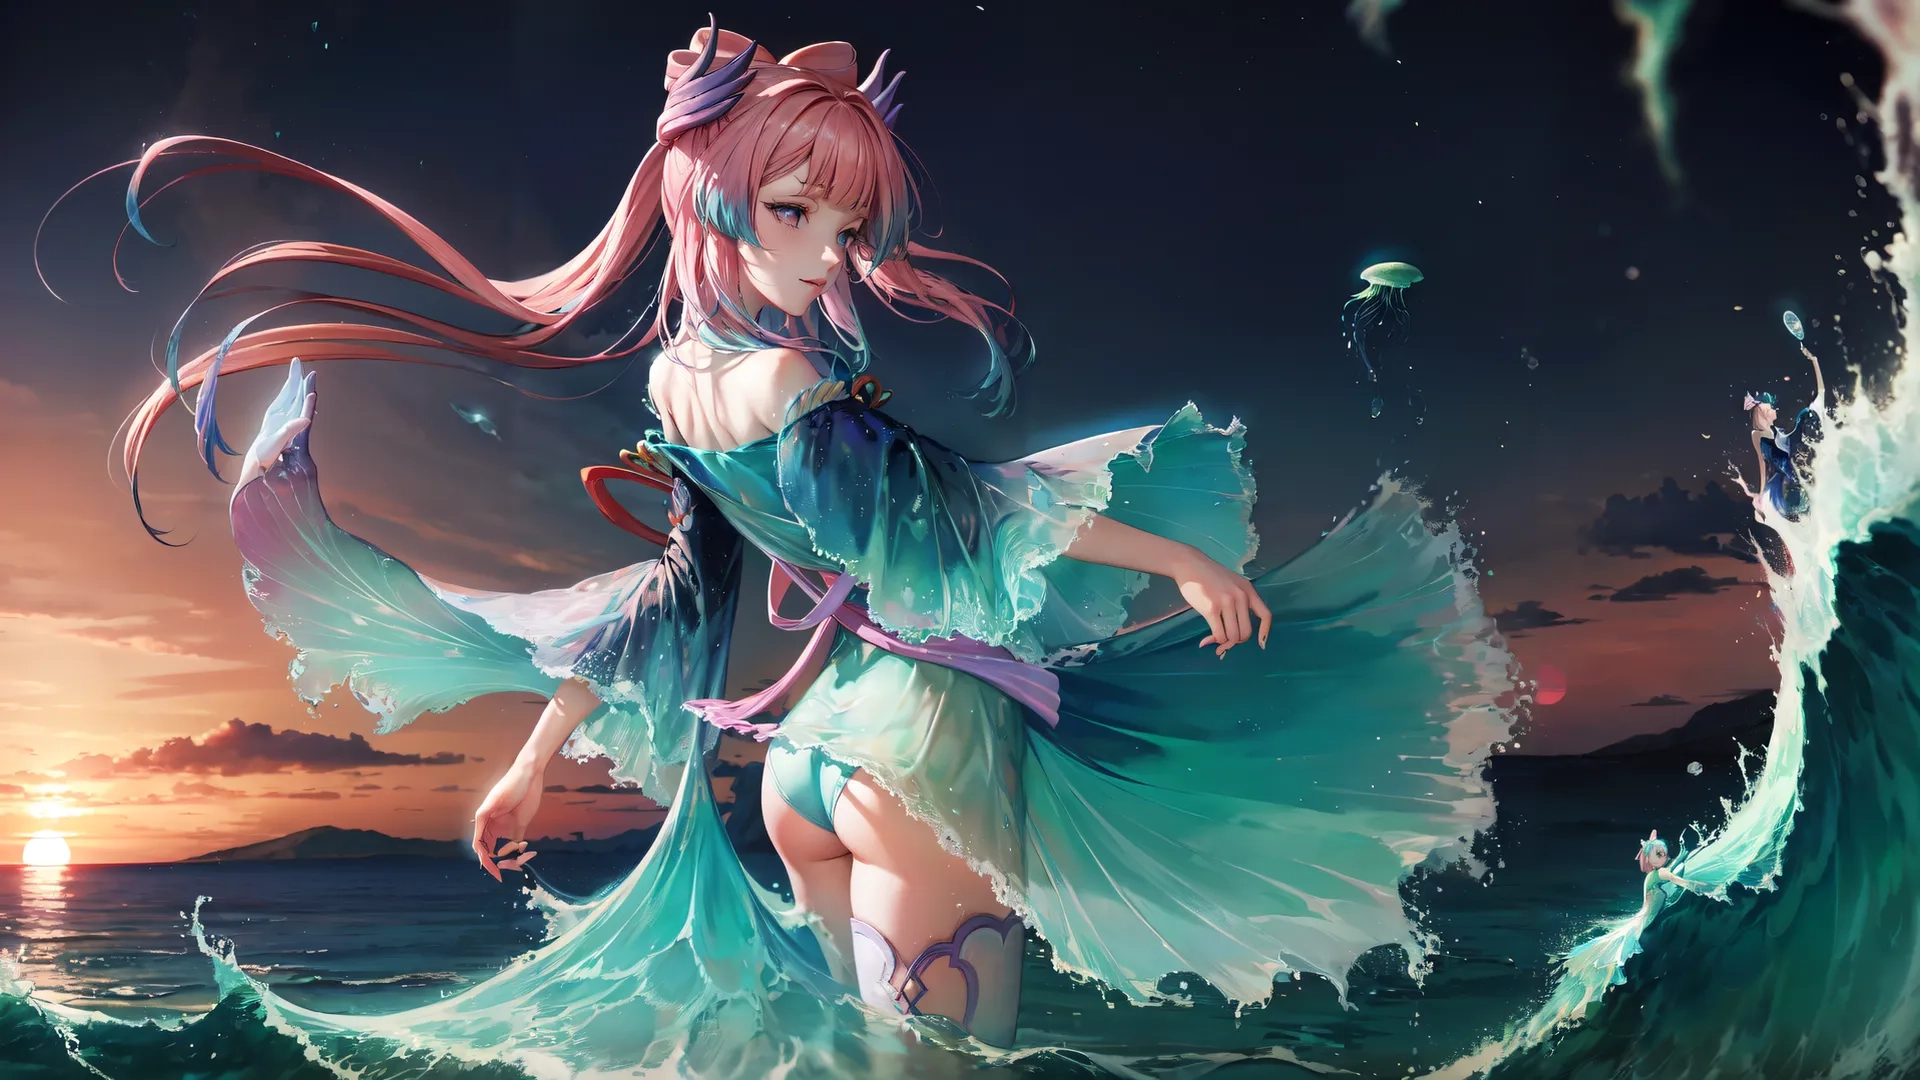 anime girl running through ocean waves in dress and sword on her hip looking at seagulls at night time background with stars shining down
